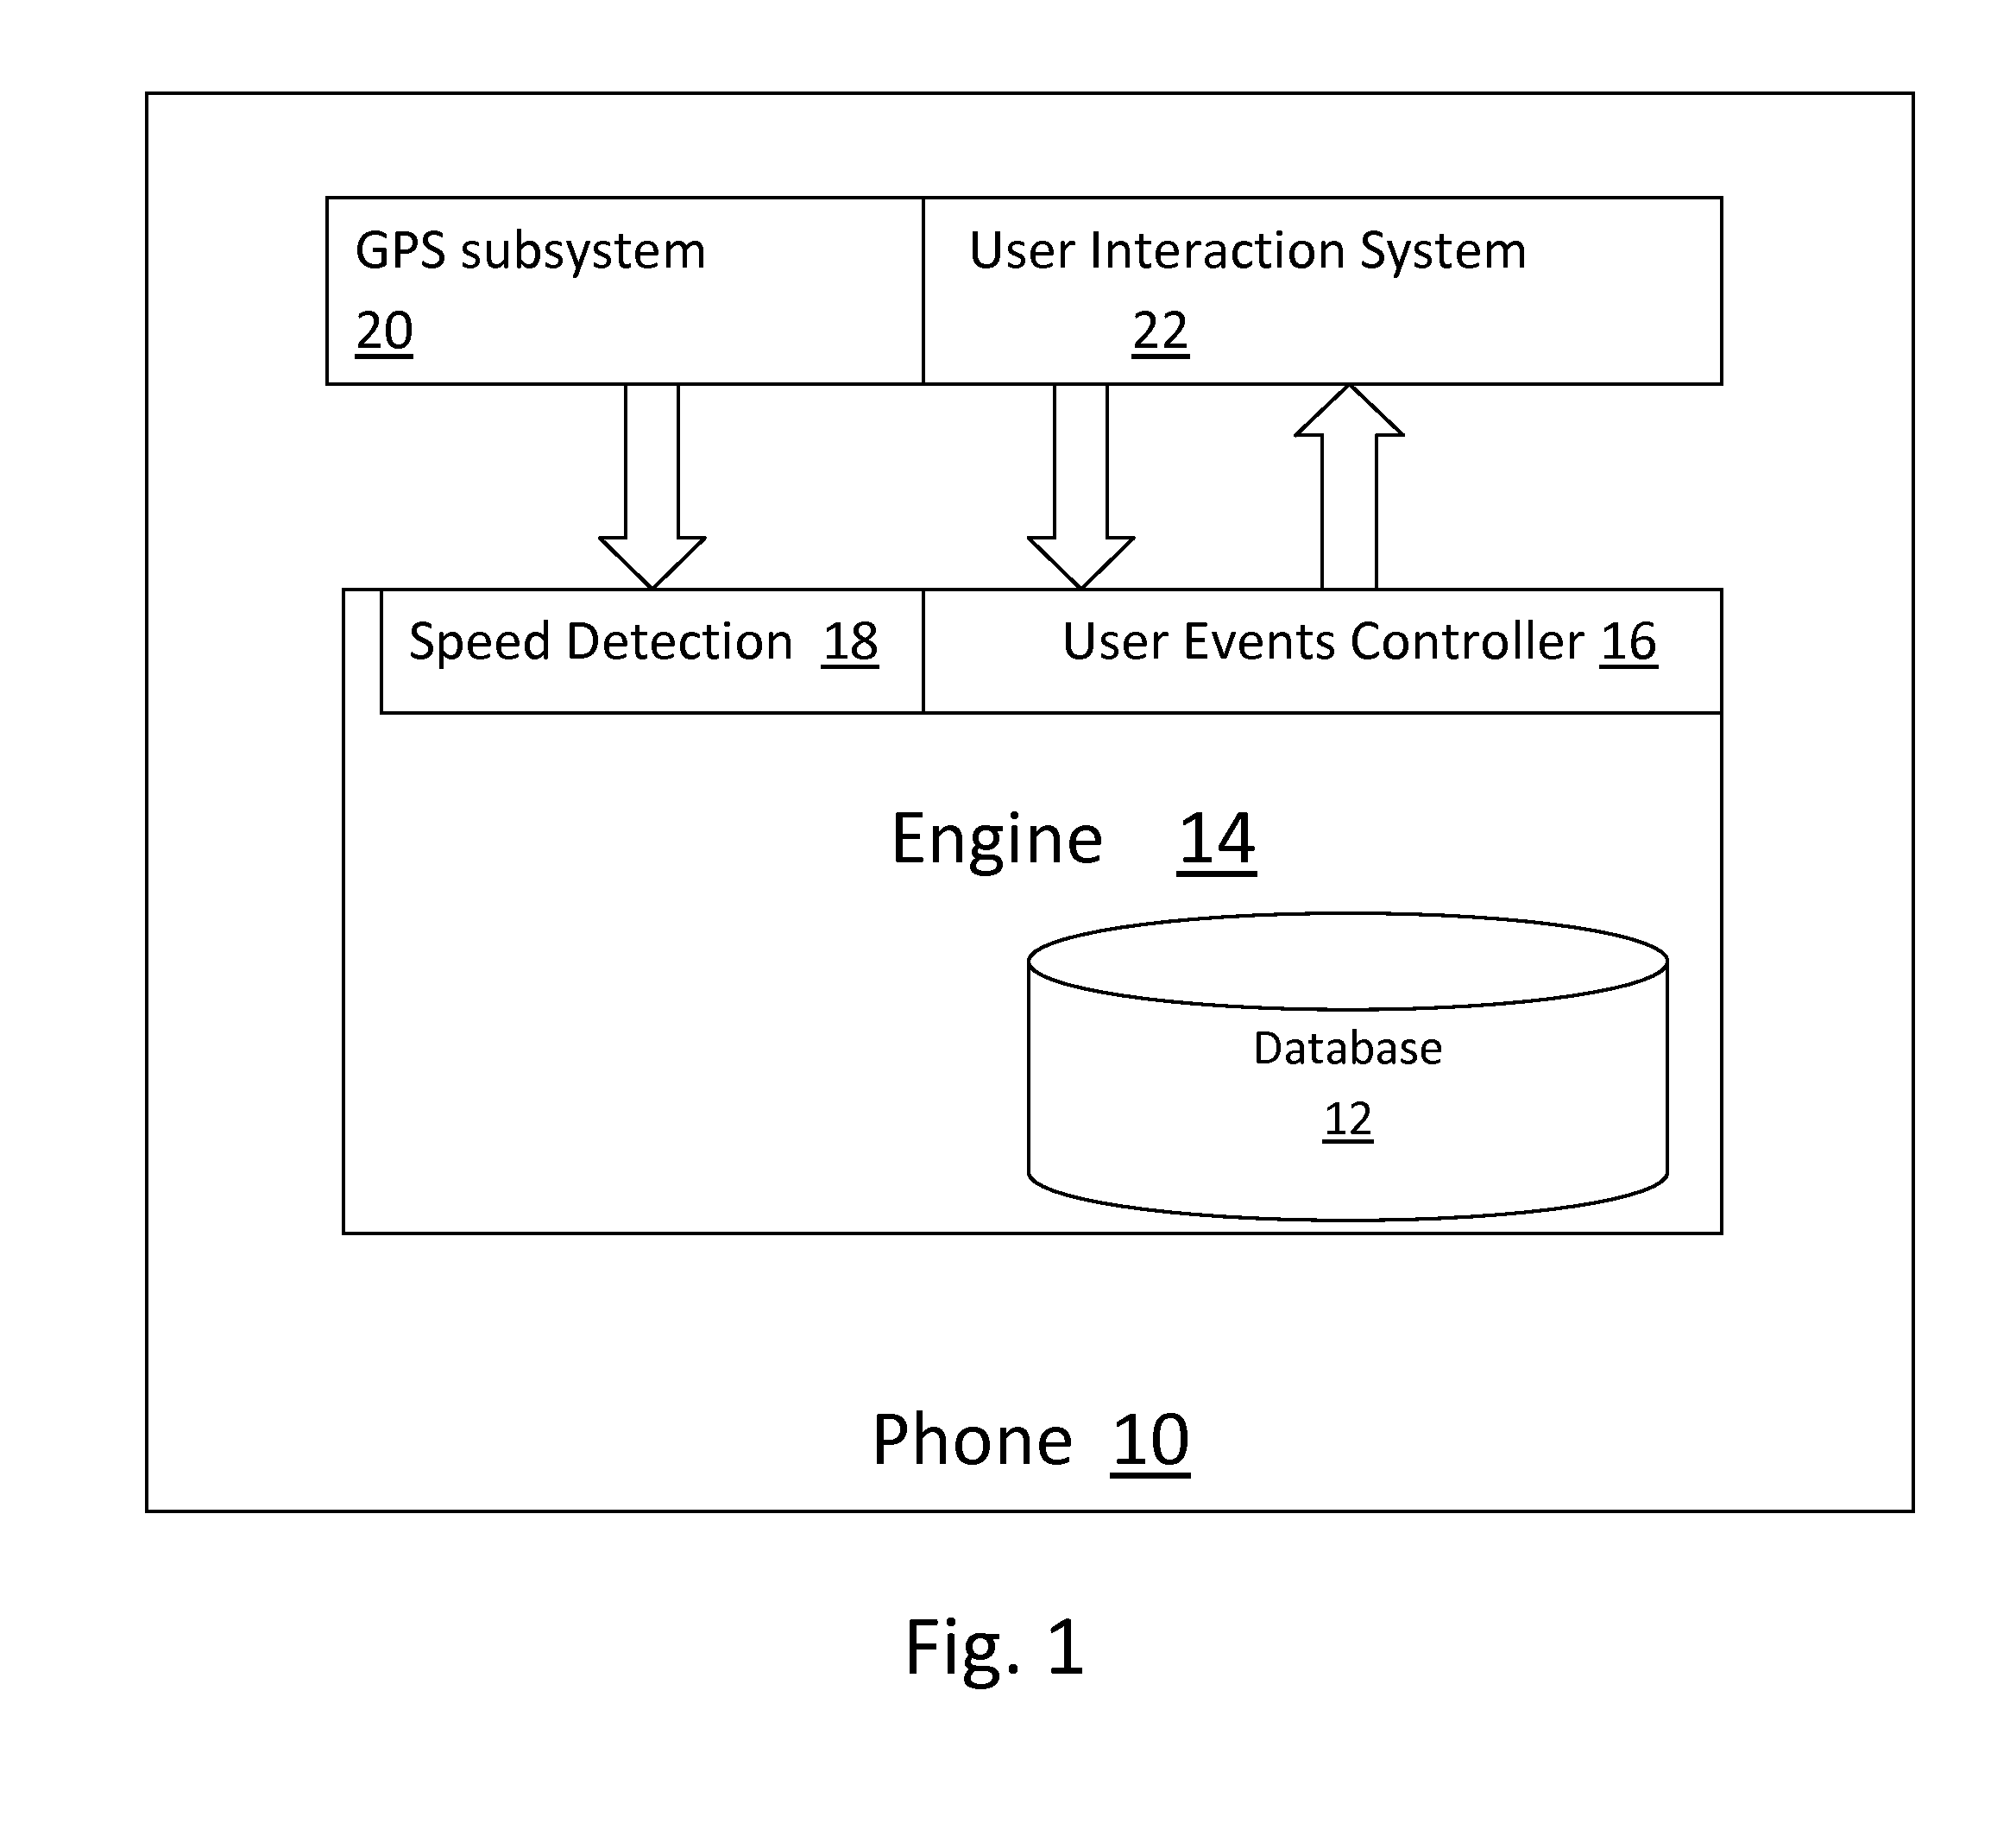 Method and system for monitoring and restricting use of mobile devices